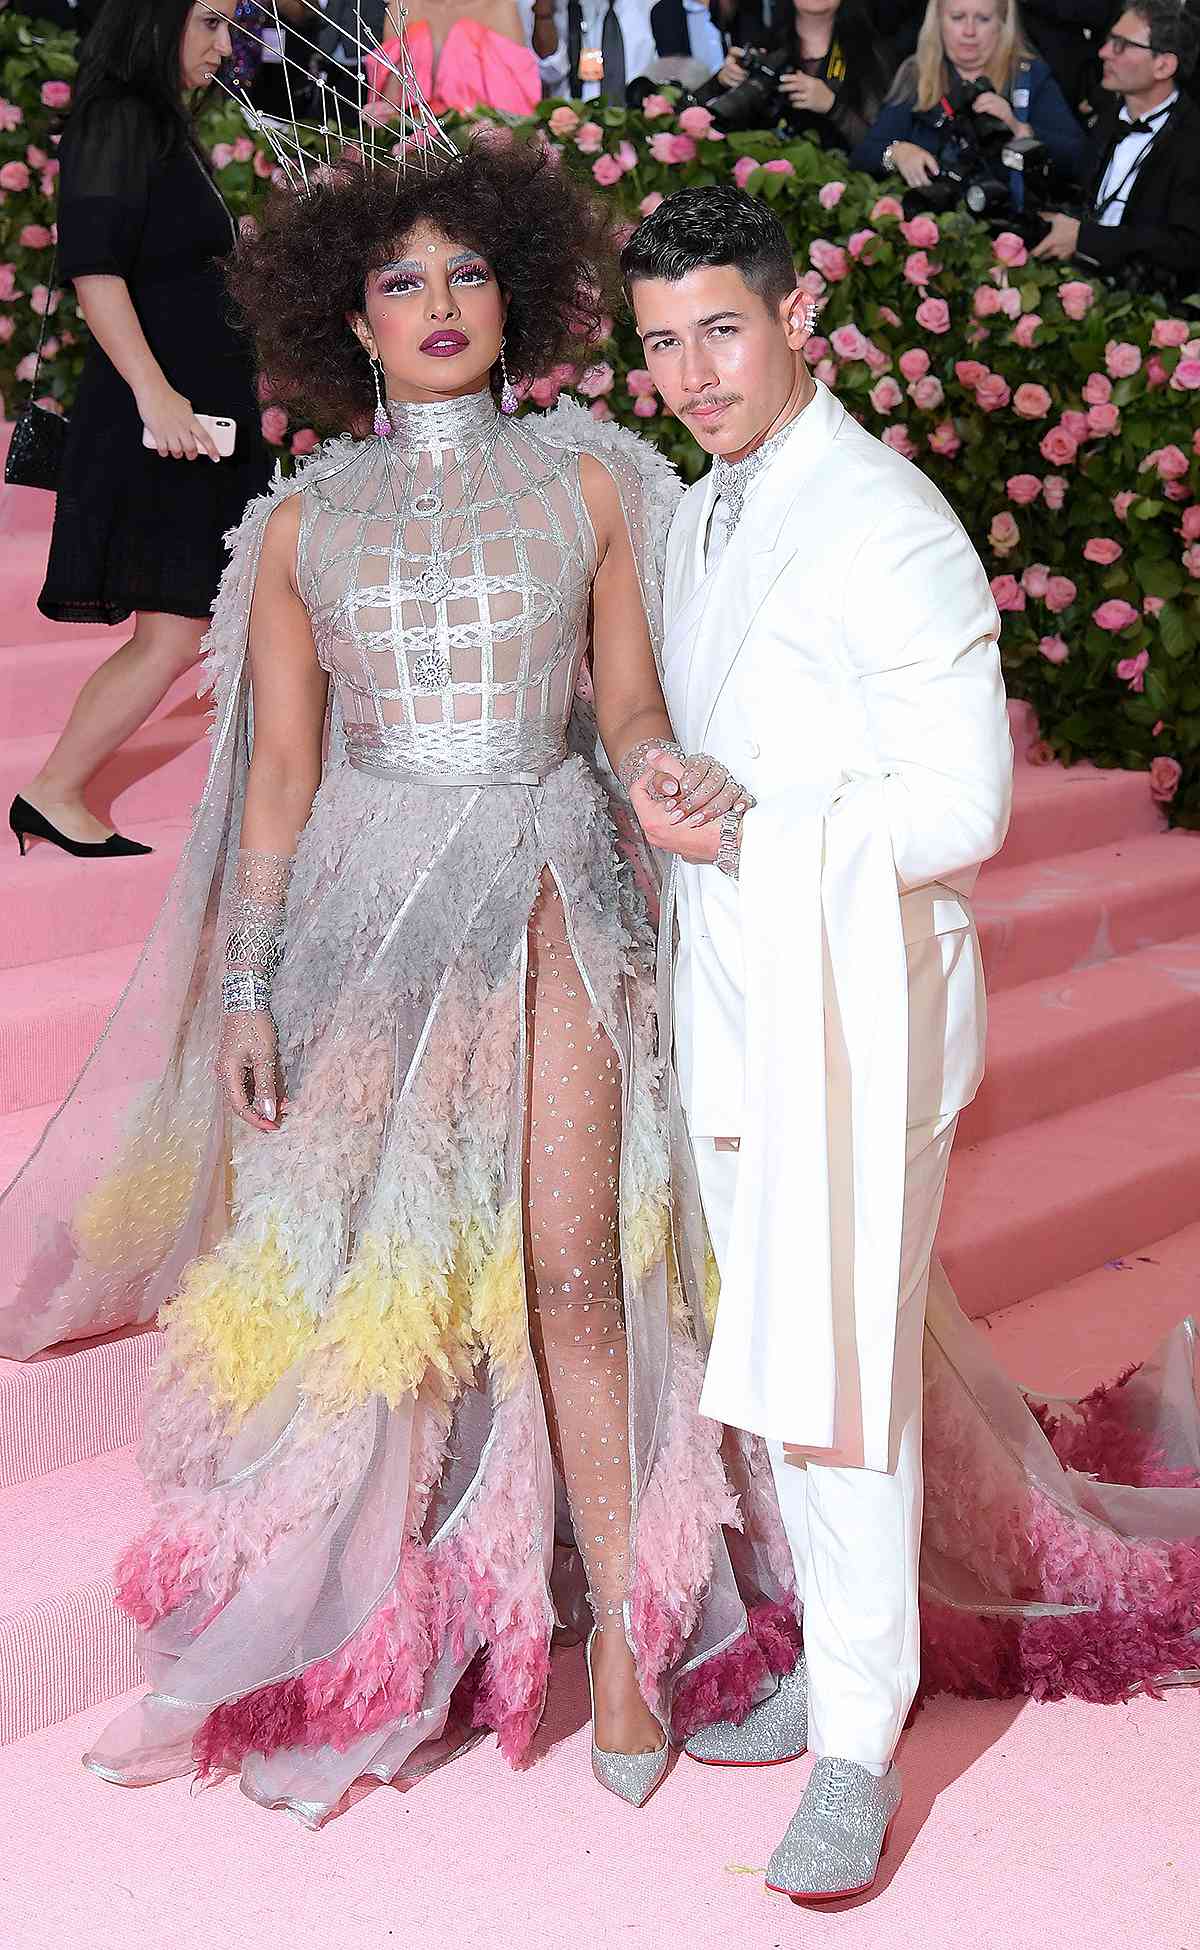 NEW YORK, NEW YORK - MAY 06: Priyanka Chopra and Nick Jonas attend The 2019 Met Gala Celebrating Camp: Notes on Fashion at Metropolitan Museum of Art on May 06, 2019 in New York City. (Photo by Neilson Barnard/Getty Images)